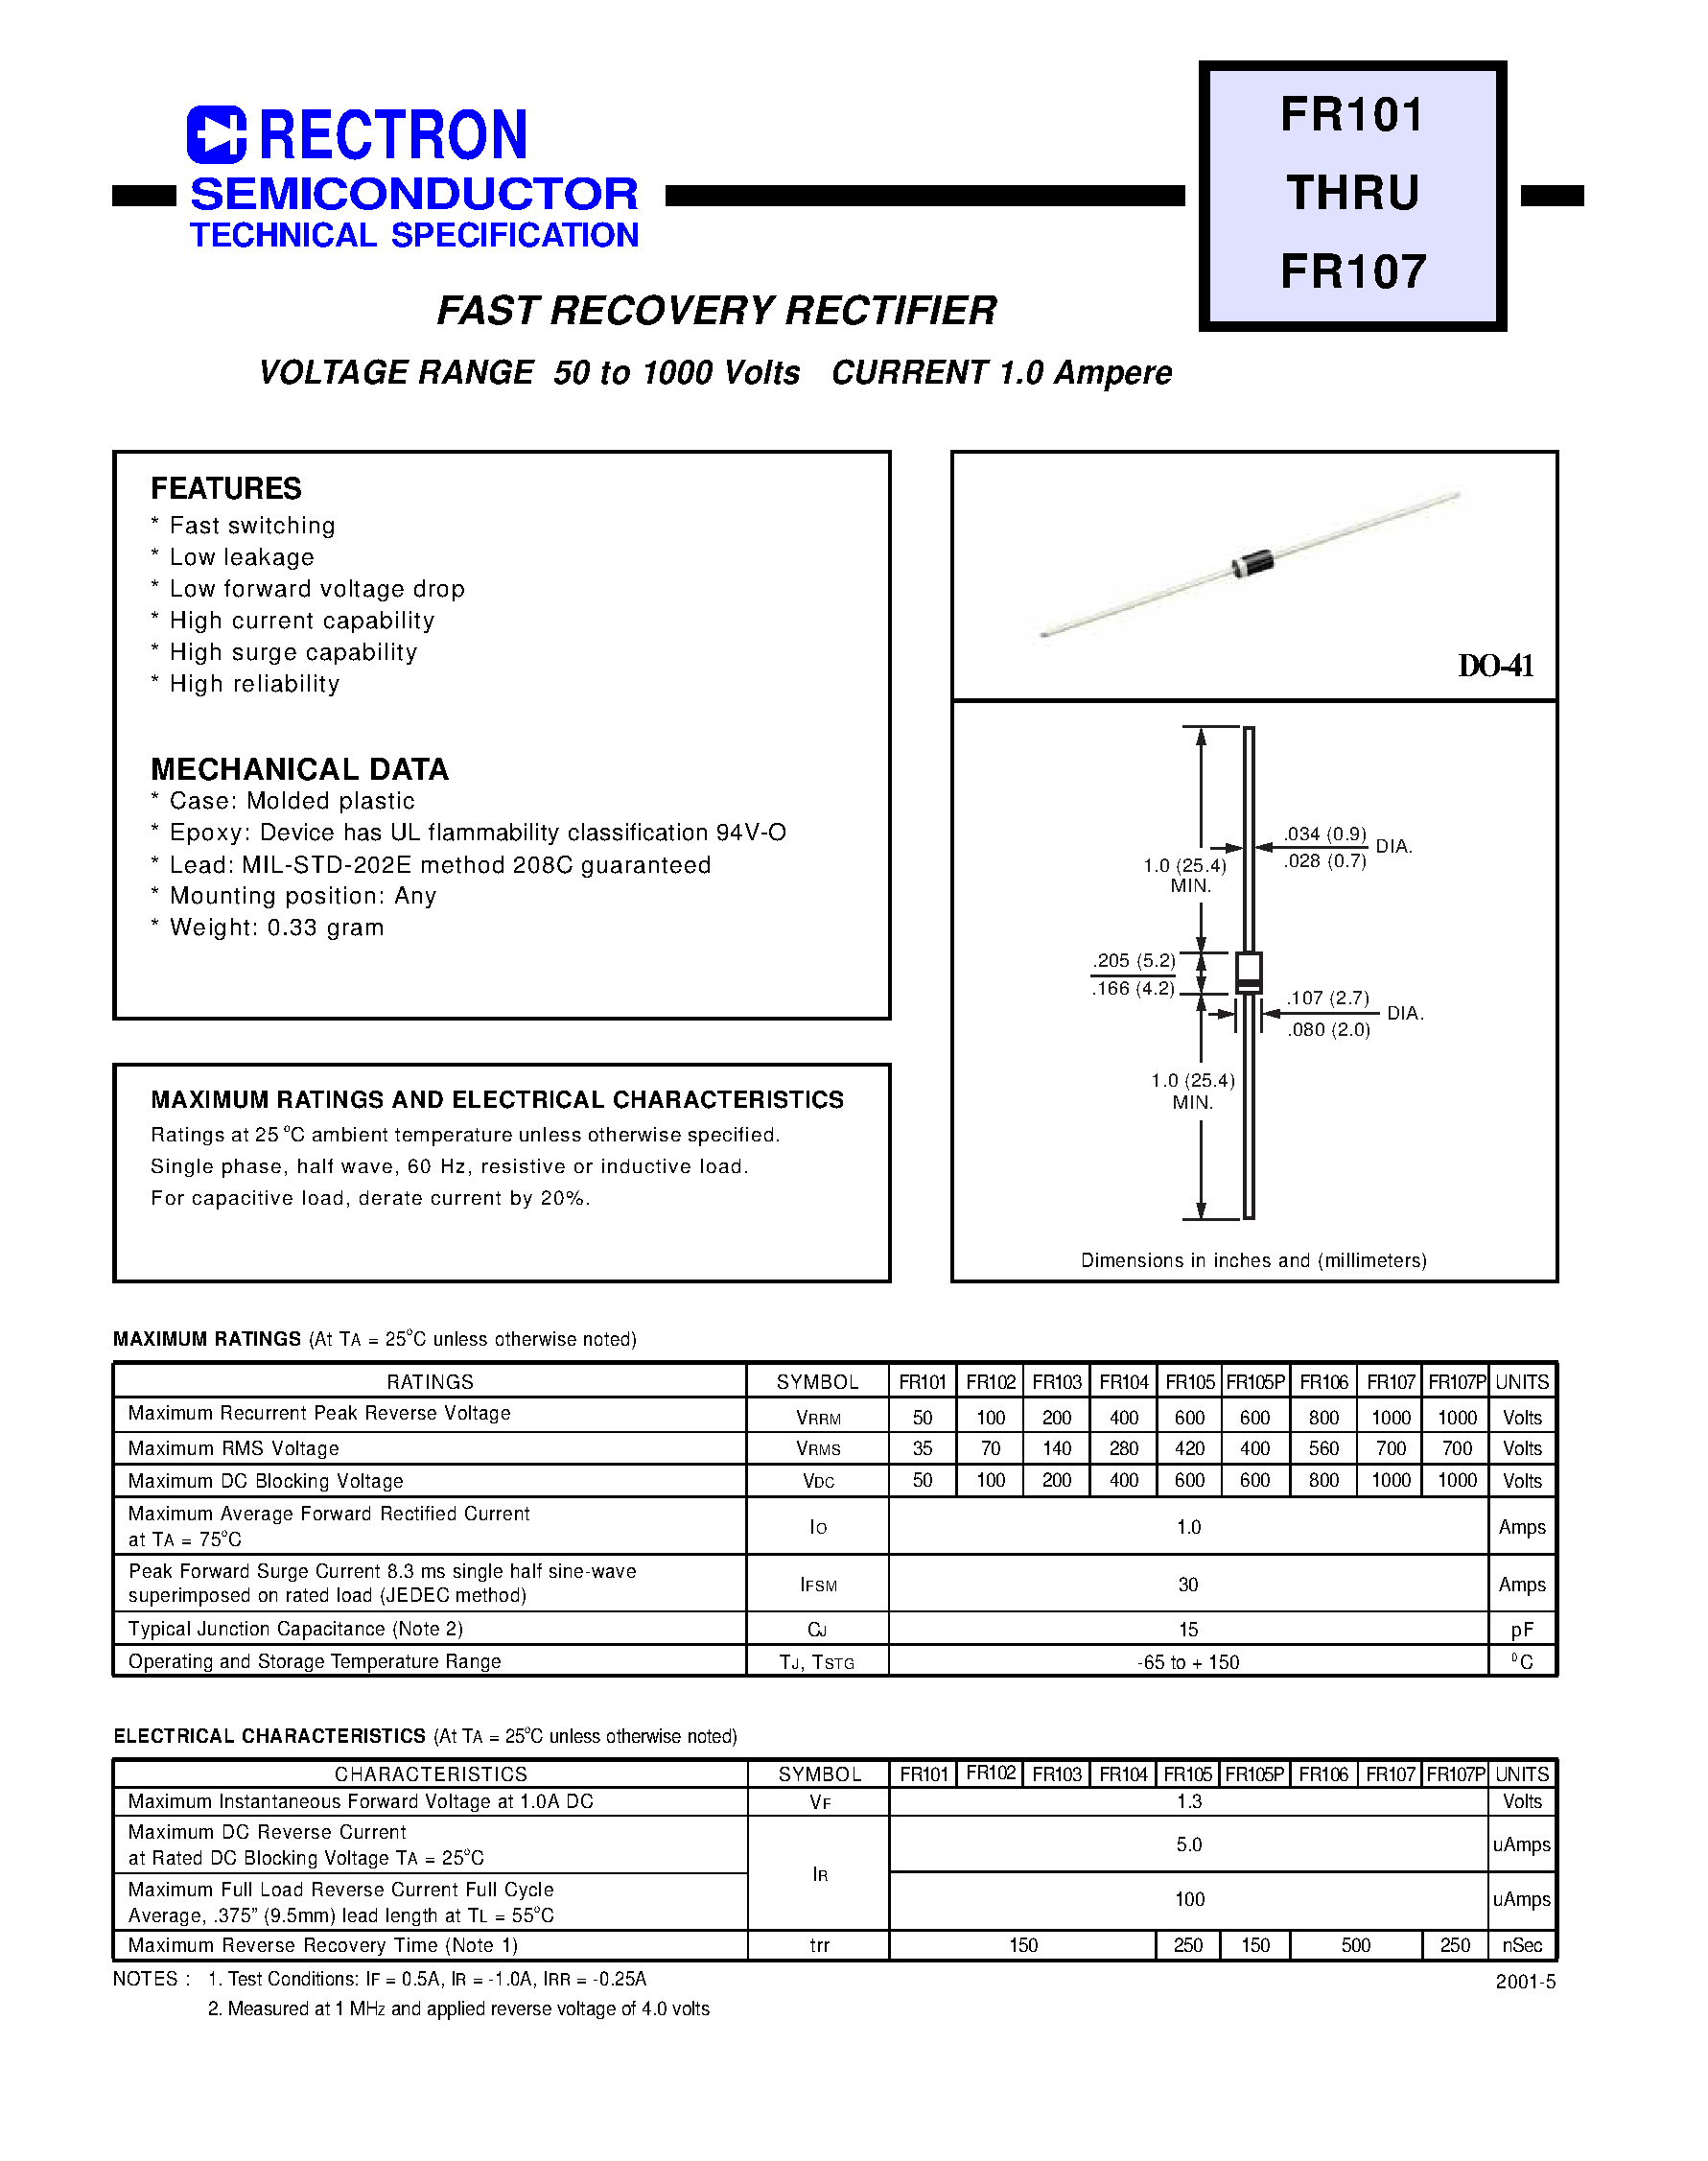 Datasheet FR101 - FAST RECOVERY RECTIFIER(VOLTAGE RANGE 50 to 1000 Volts CURRENT 1.0 Ampere) page 1